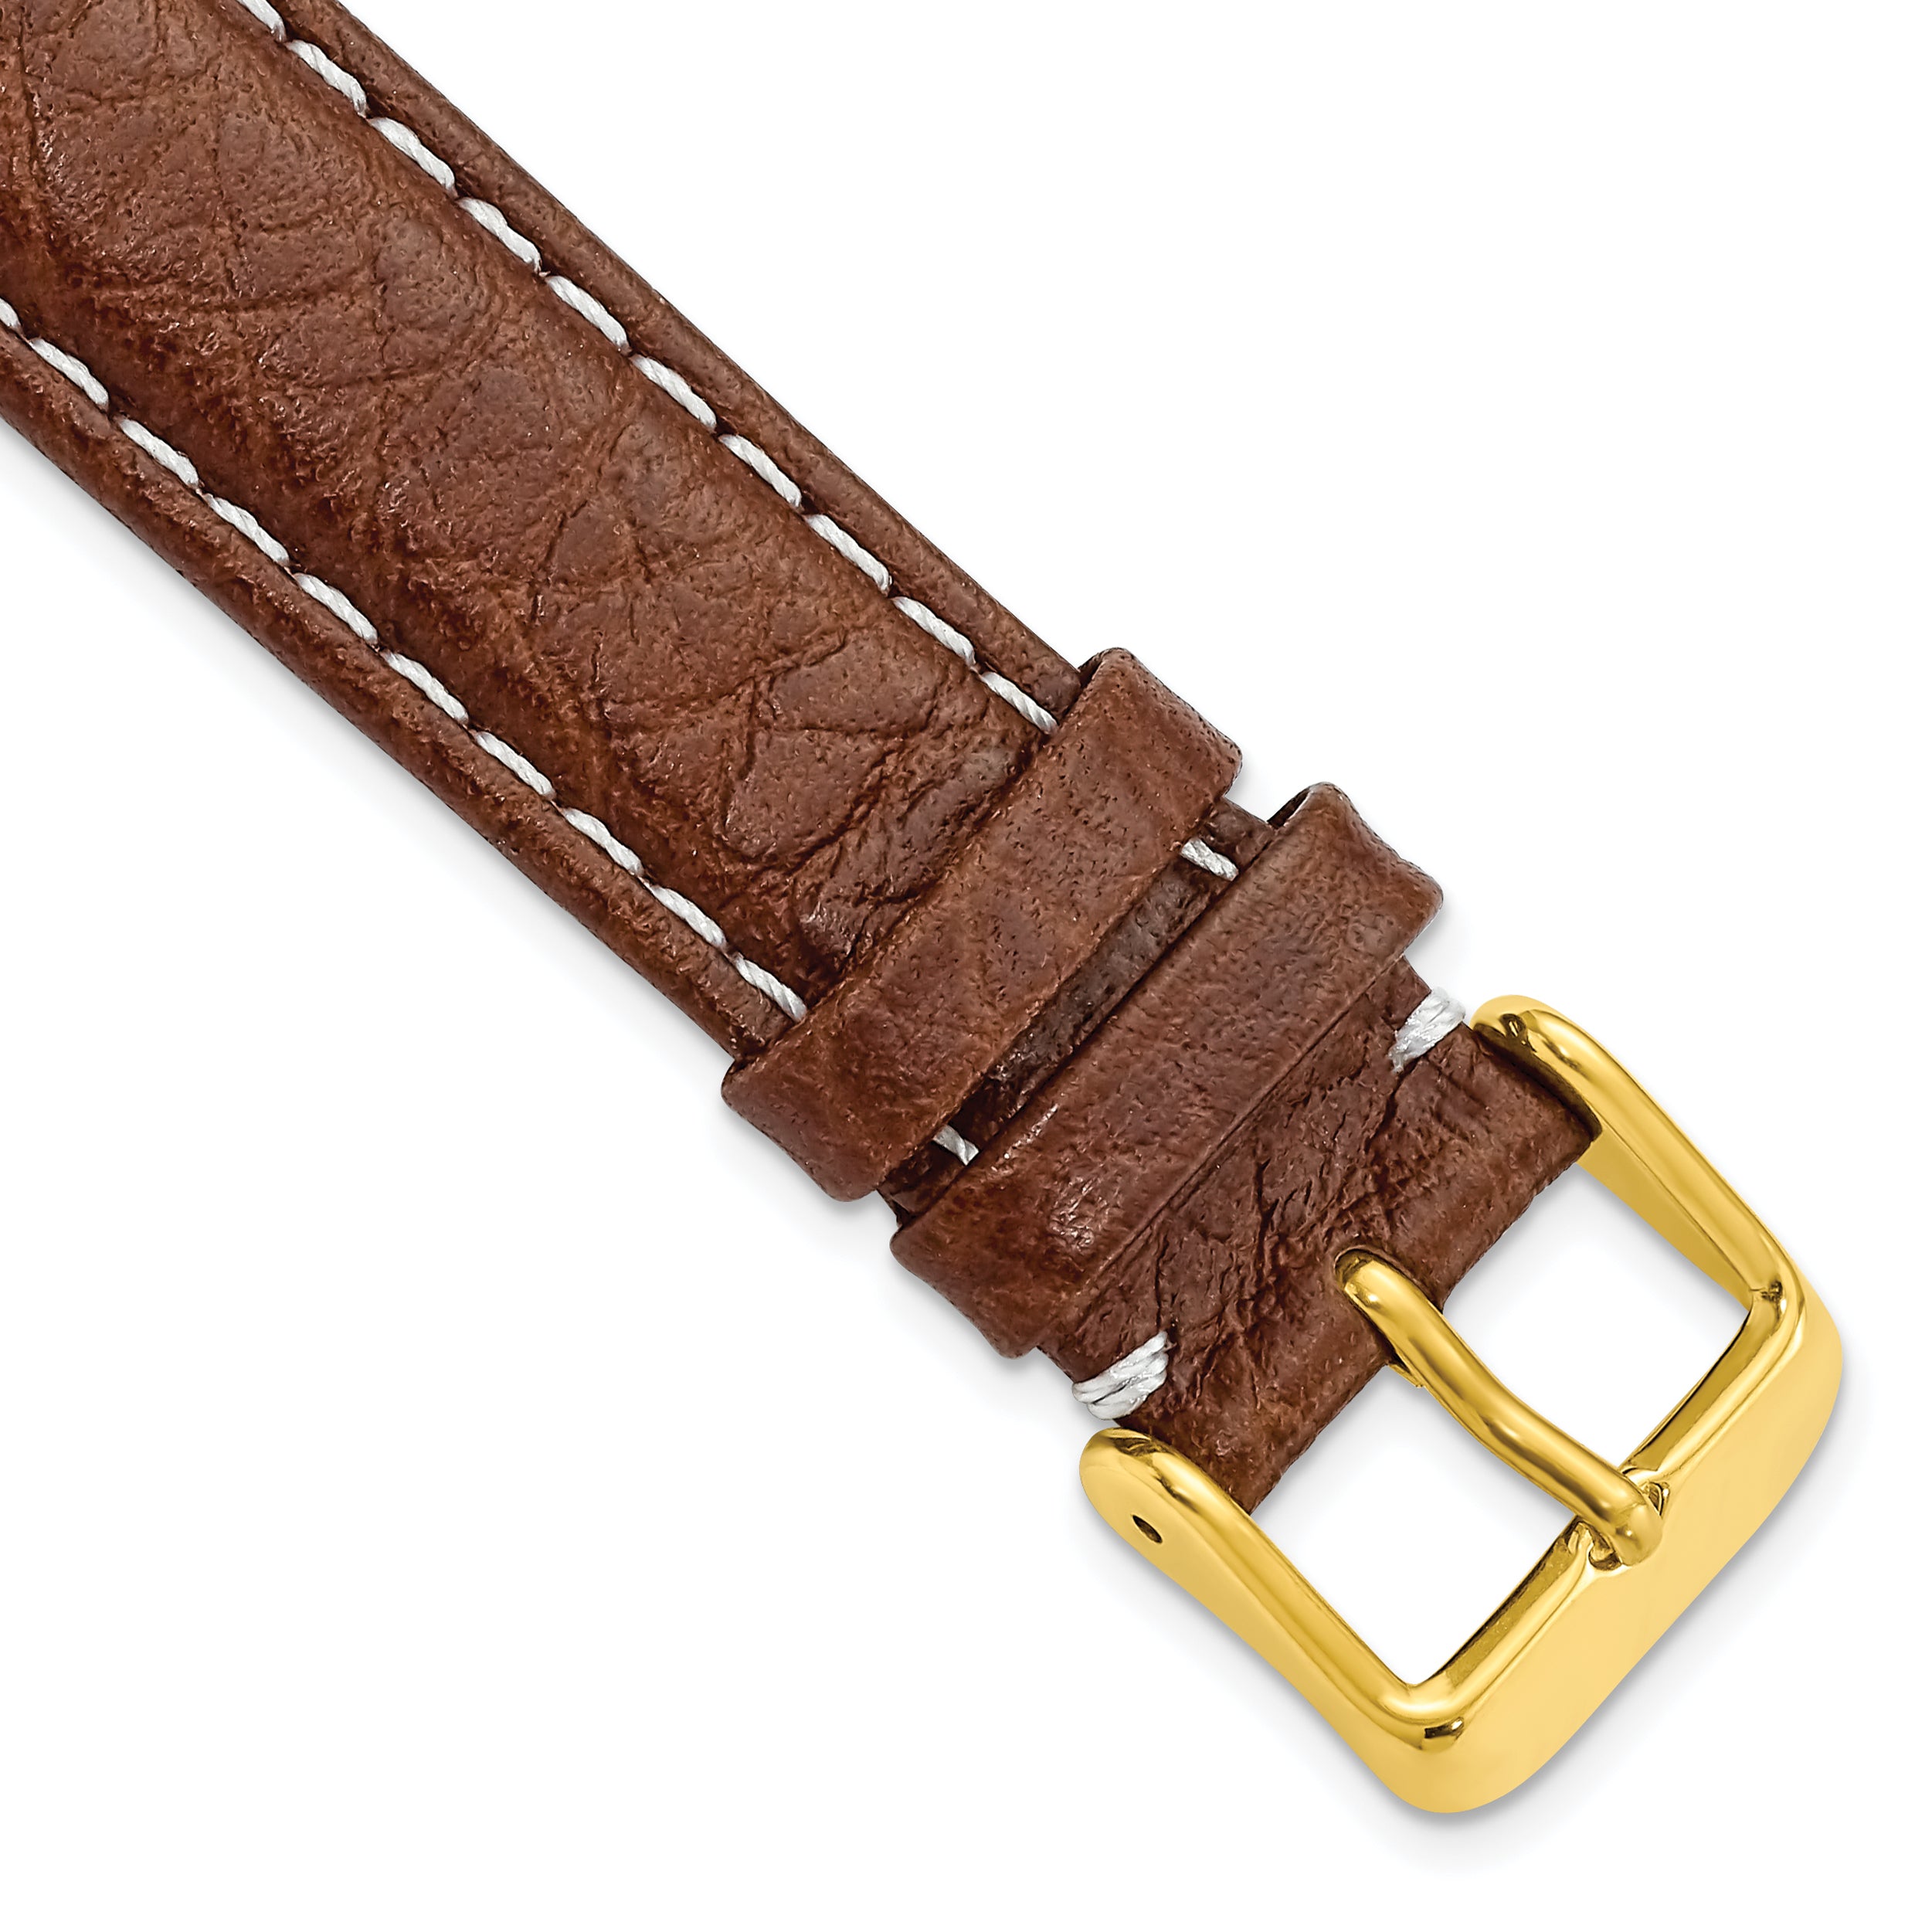 DeBeer 17mm Havana Sport Leather with White Stitching and Gold-tone Buckle 7.5 inch Watch Band